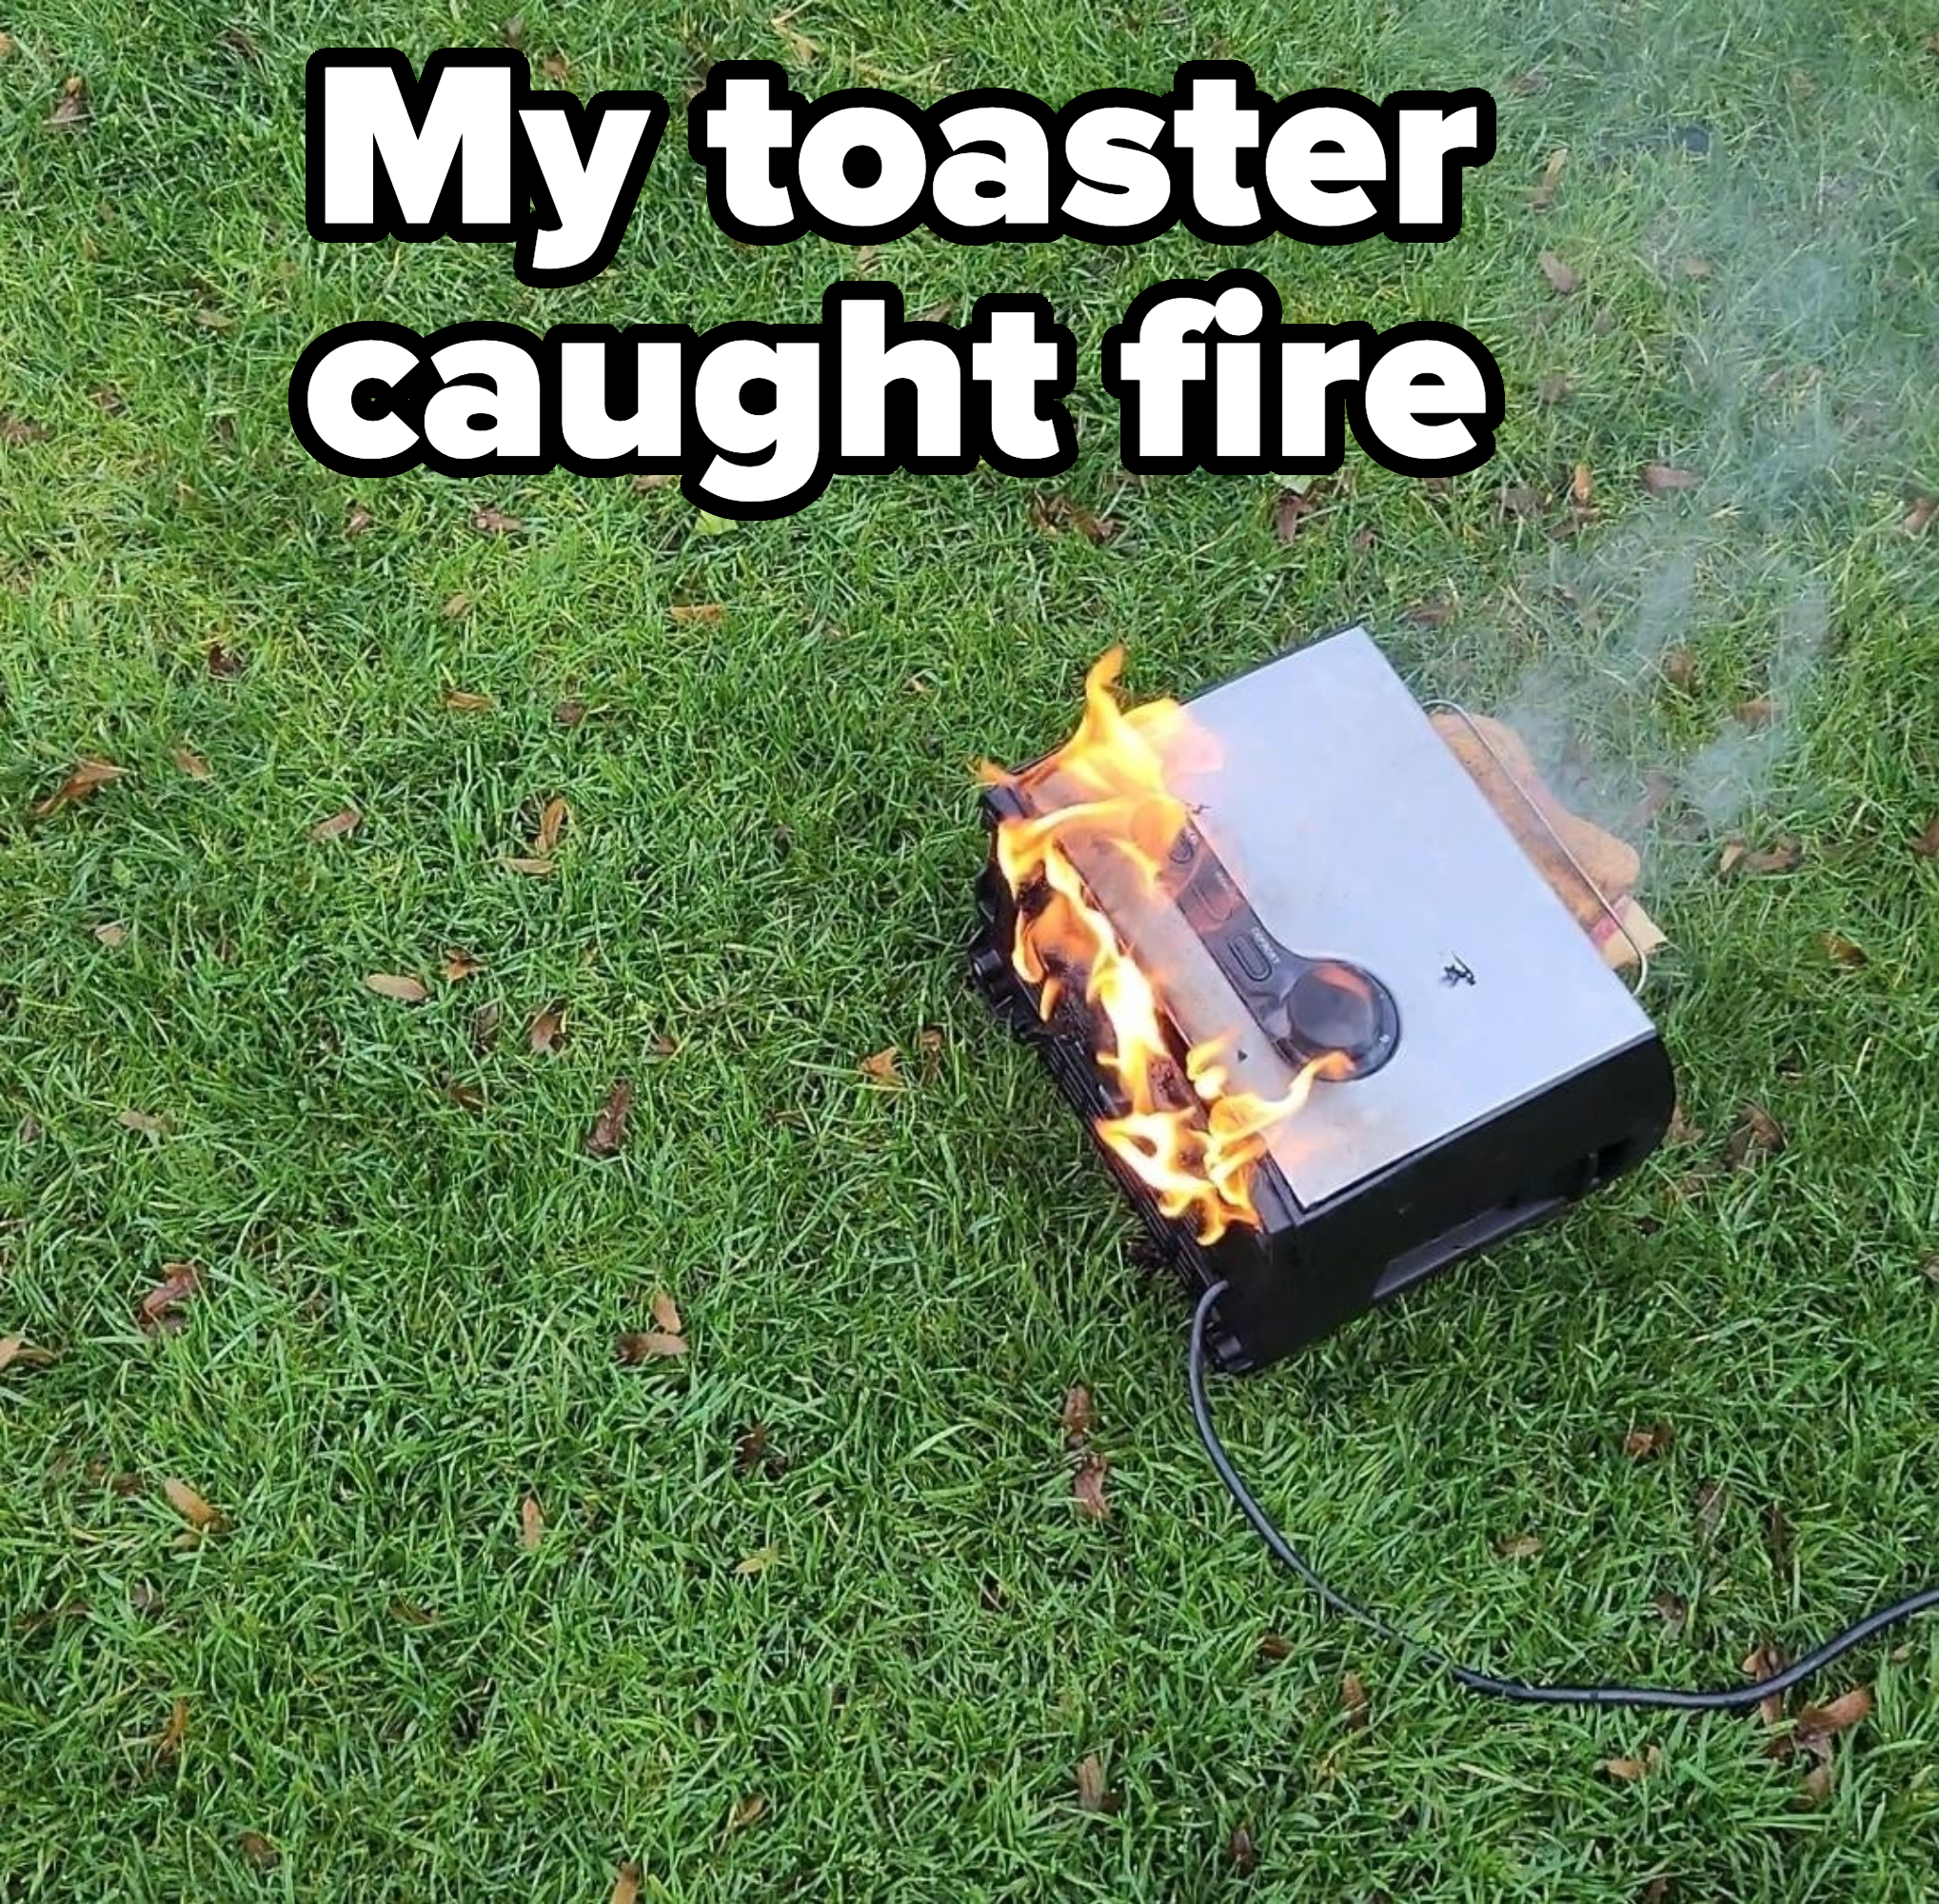 A toaster on fire on the grass